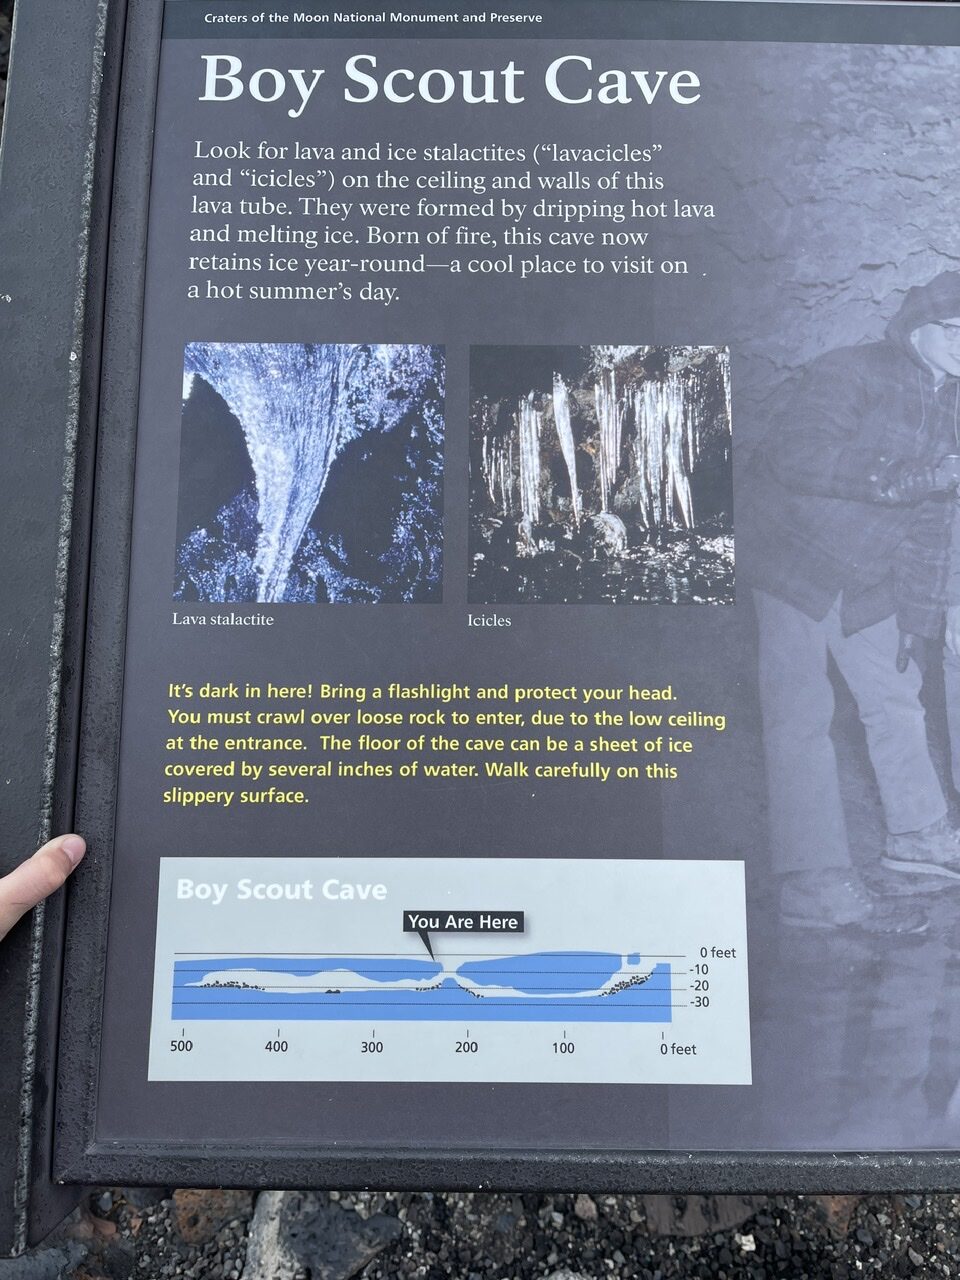 Boy Scout cave information page right before you walk down in the dark cold cave